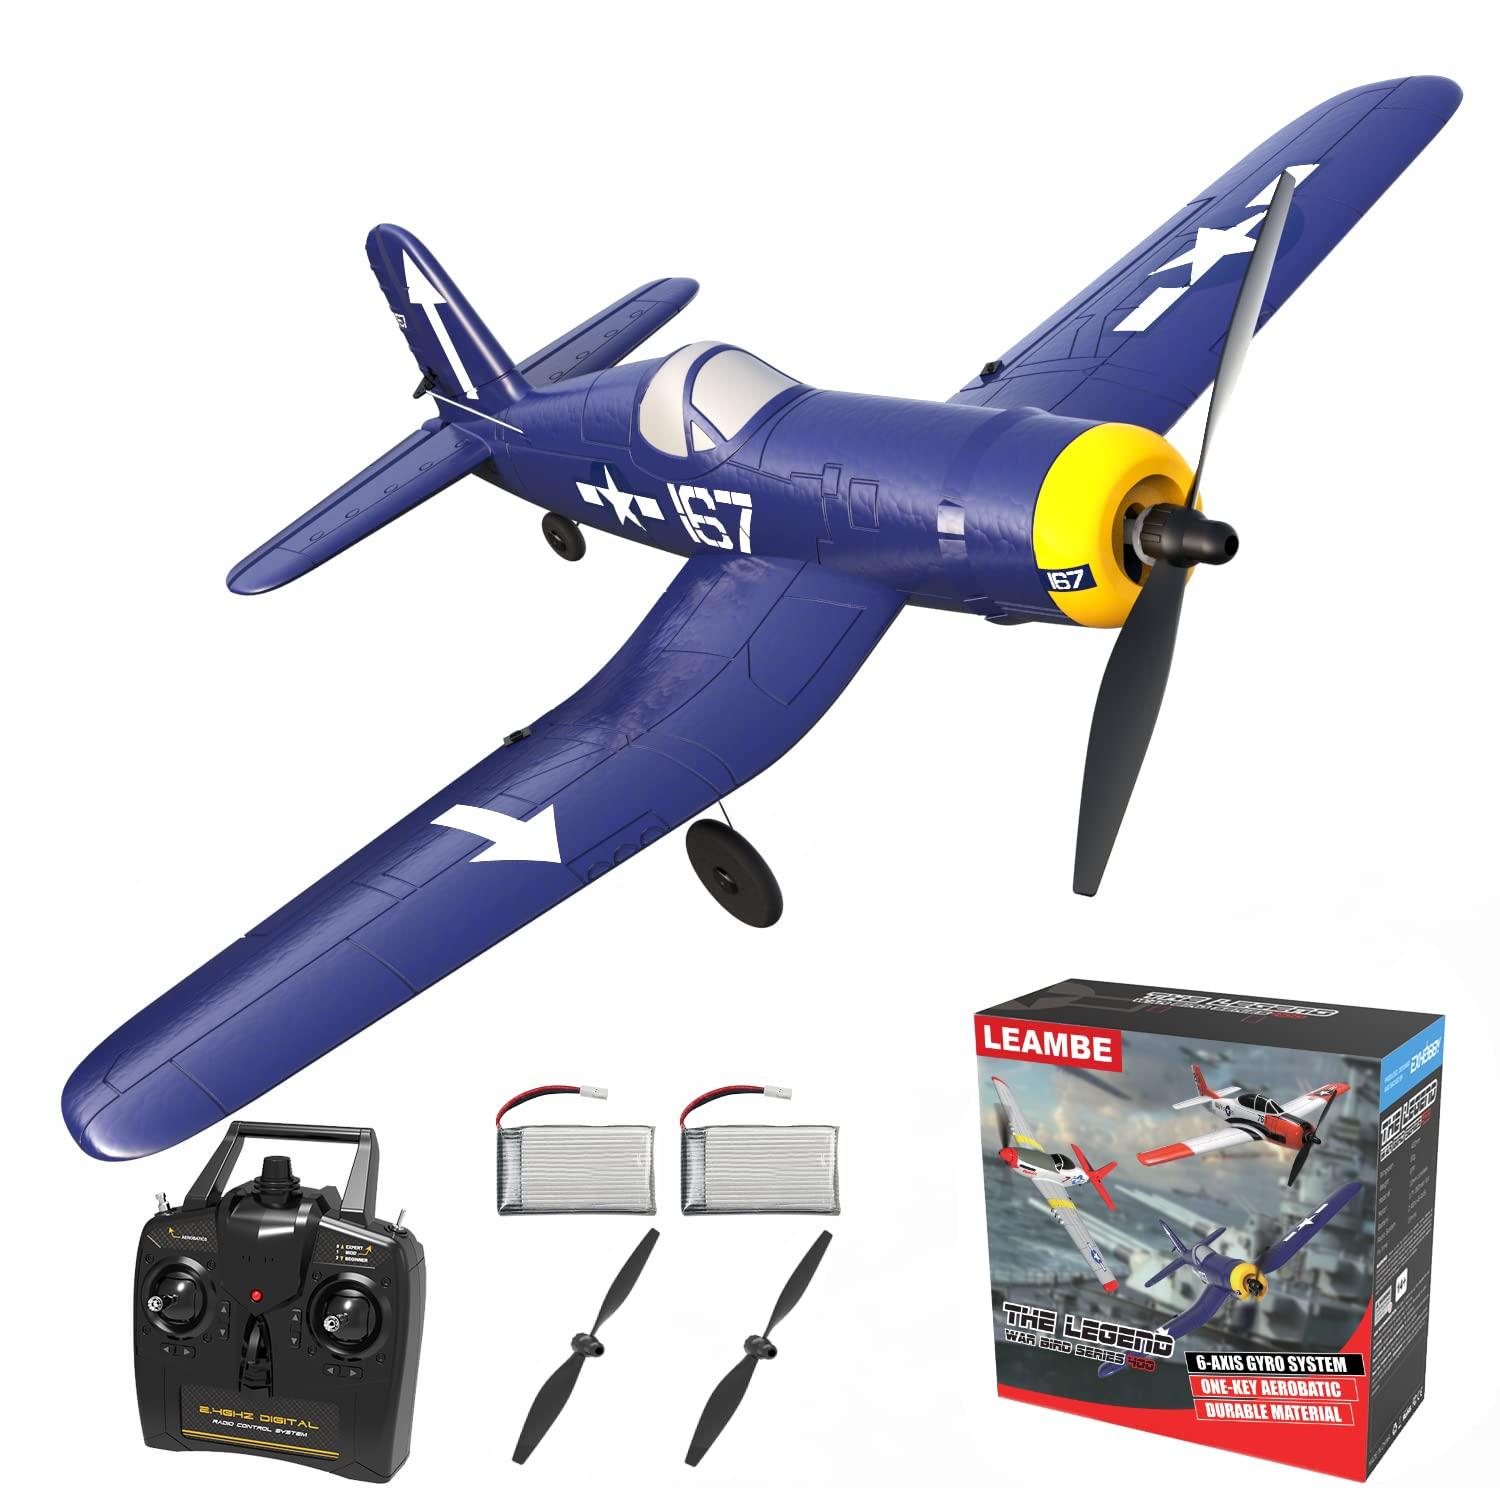 Online Rc Airplane Store: Choosing the Right RC Airplane Model for Your Skill Level